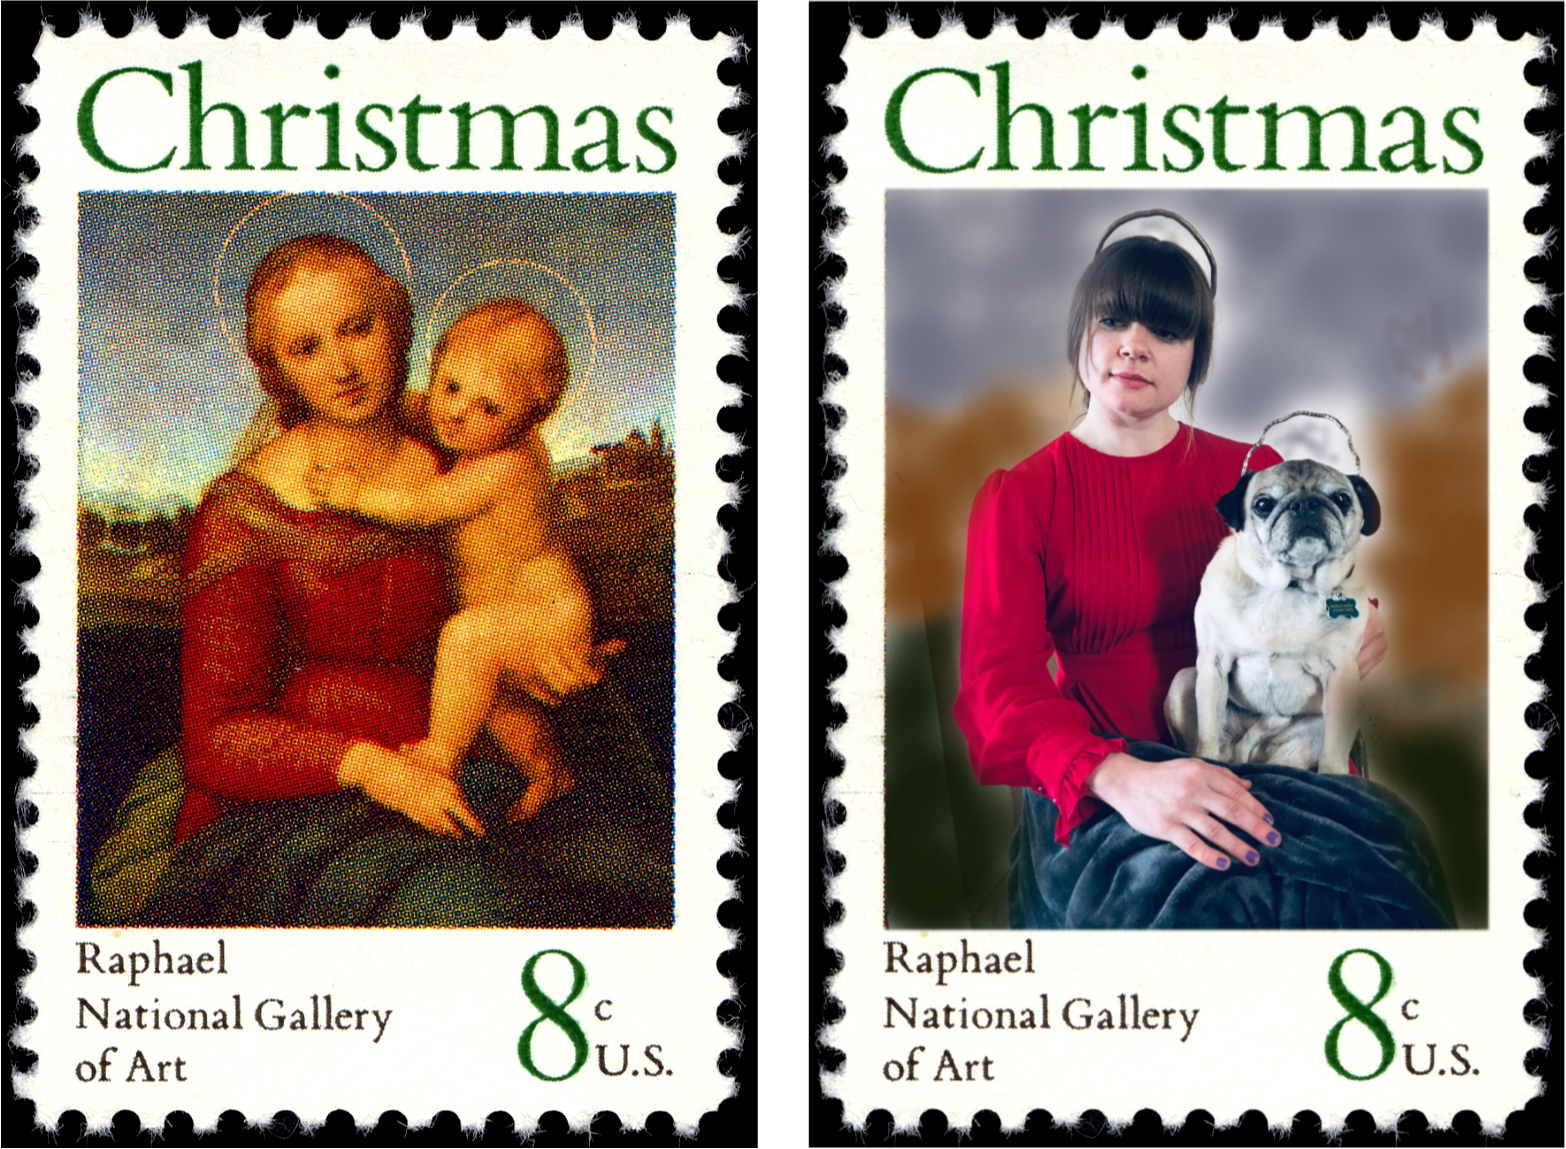 Two similar postage stamps side by side. Left stamp depicts painting of woman with halo holding baby with halo. Right stamp depicts photograph of woman with halo holding dog with halo.